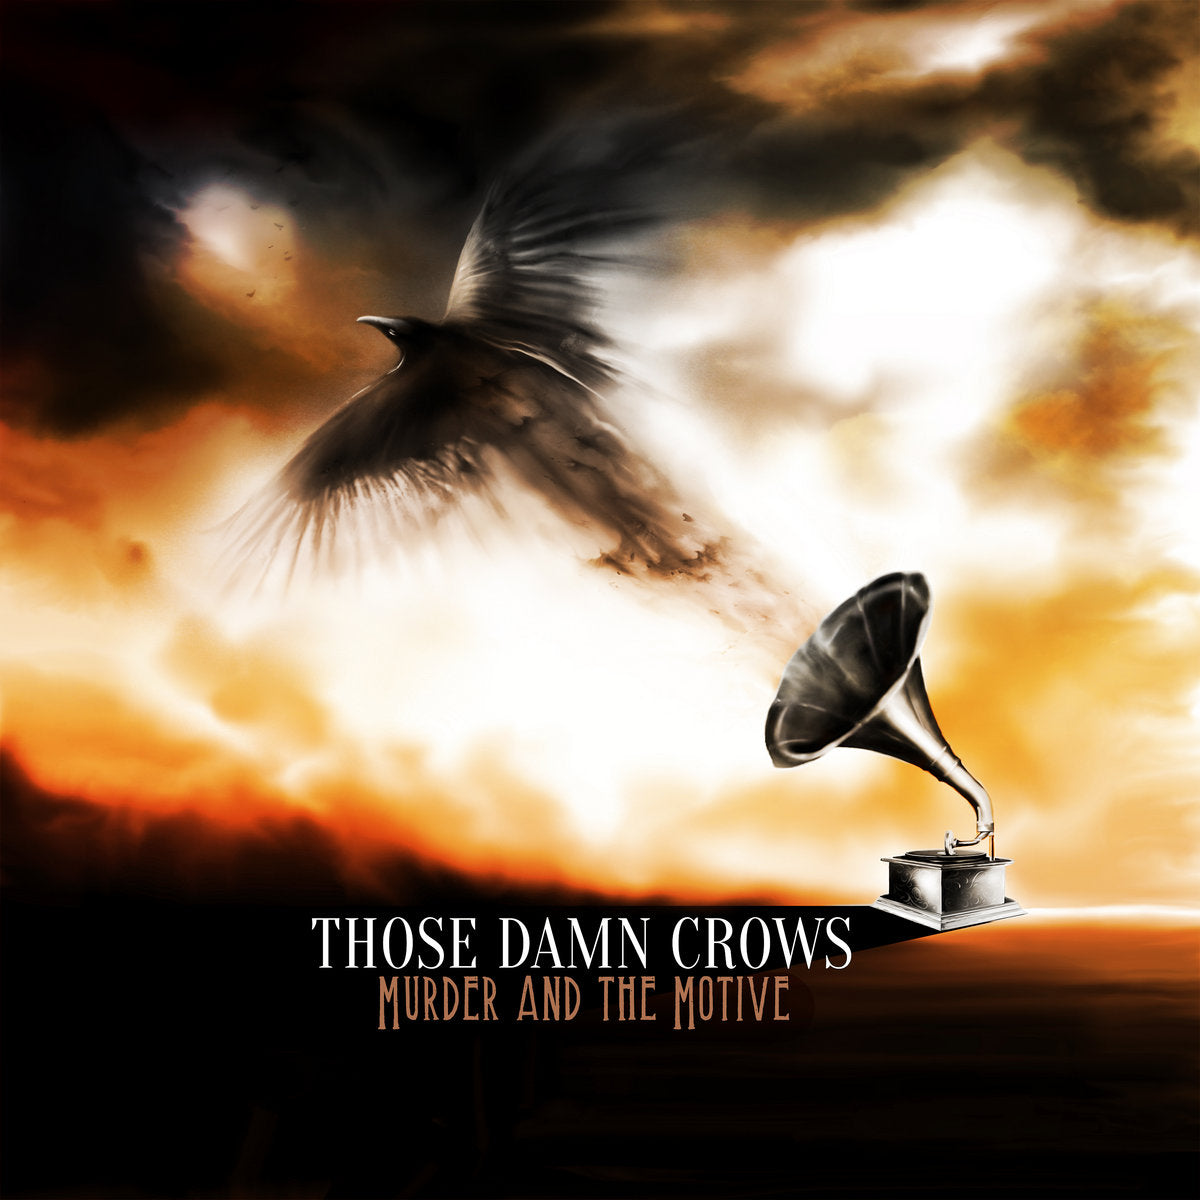 Those Damn Crows "Murder And The Motive" CD